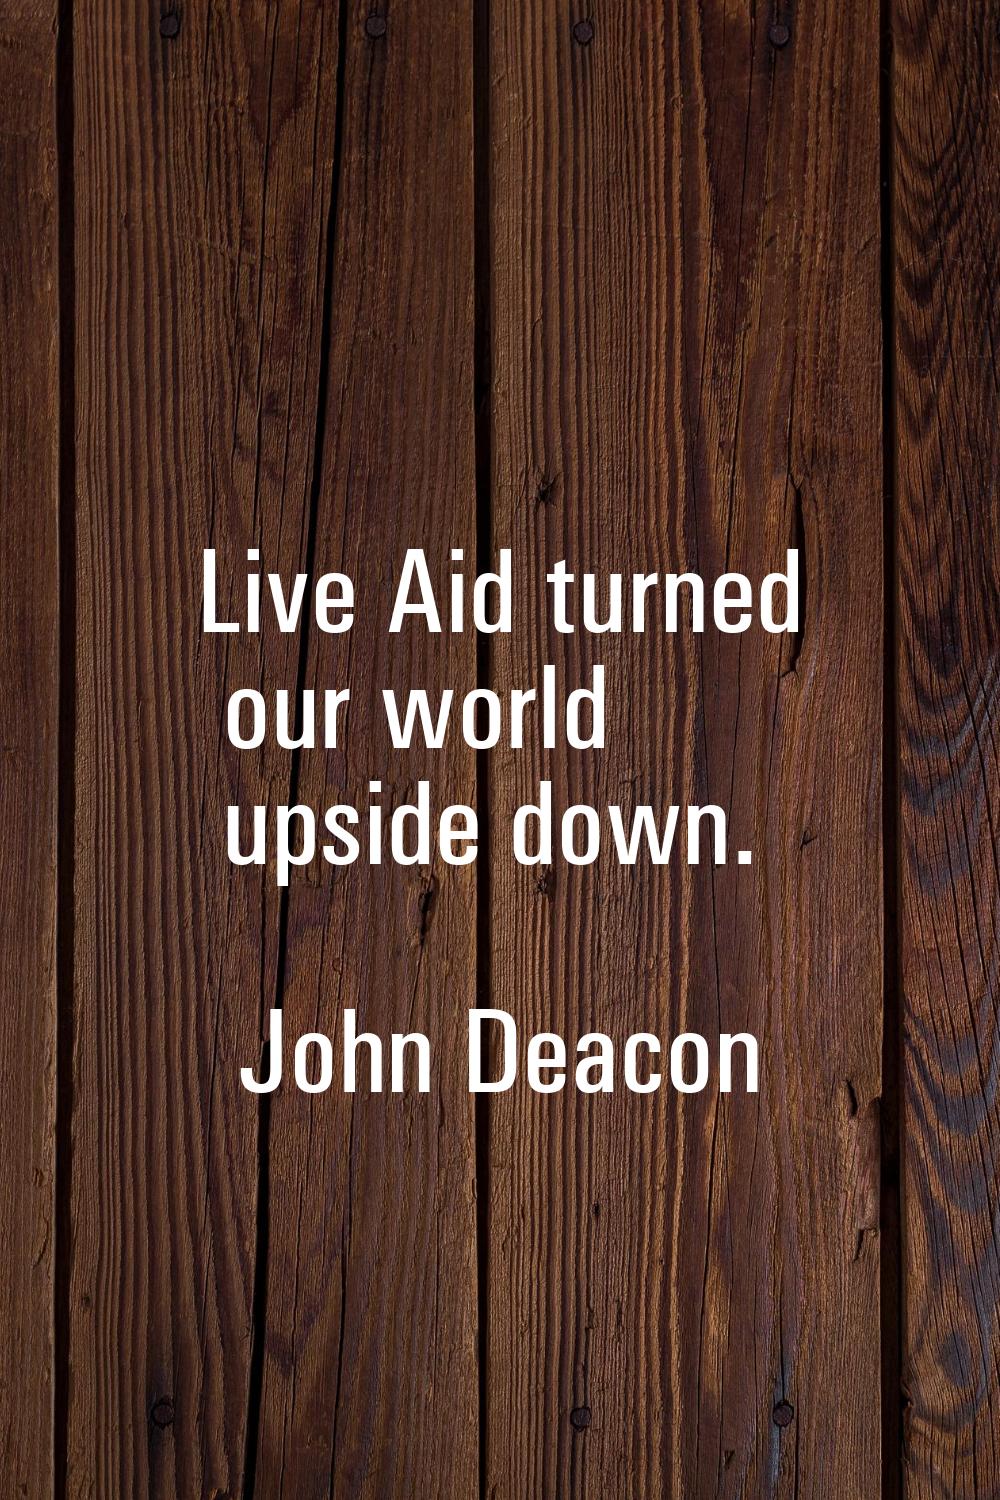 Live Aid turned our world upside down.